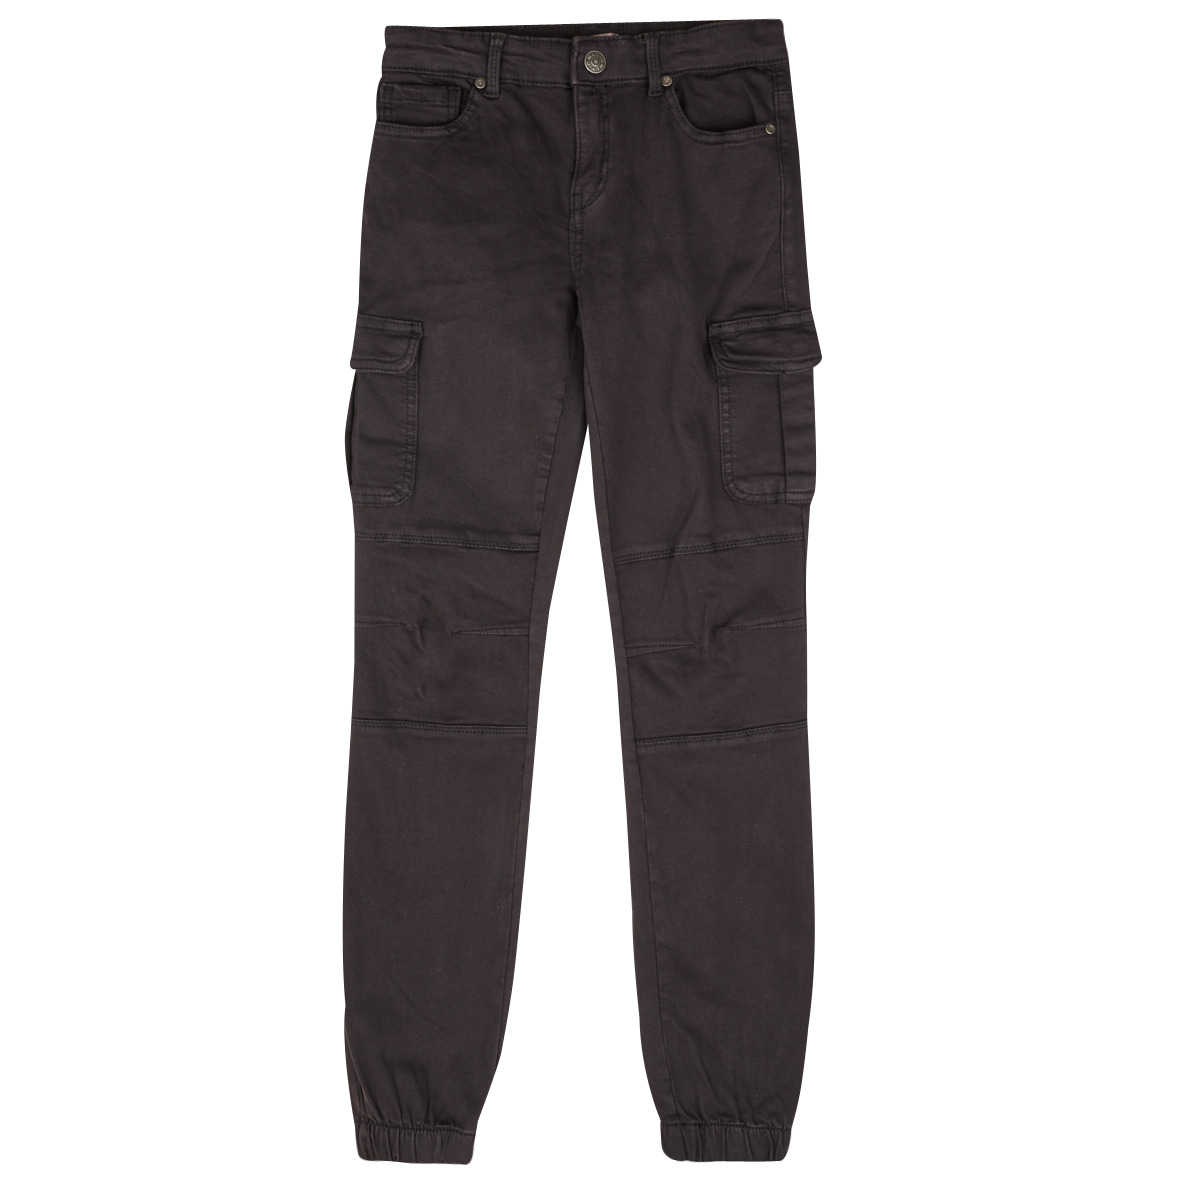 Only KOGMISSOURI REG LIFE CARGO PNT NOOS Black - Free Delivery with  Rubbersole.co.uk ! - Clothing Cargo trousers Child £